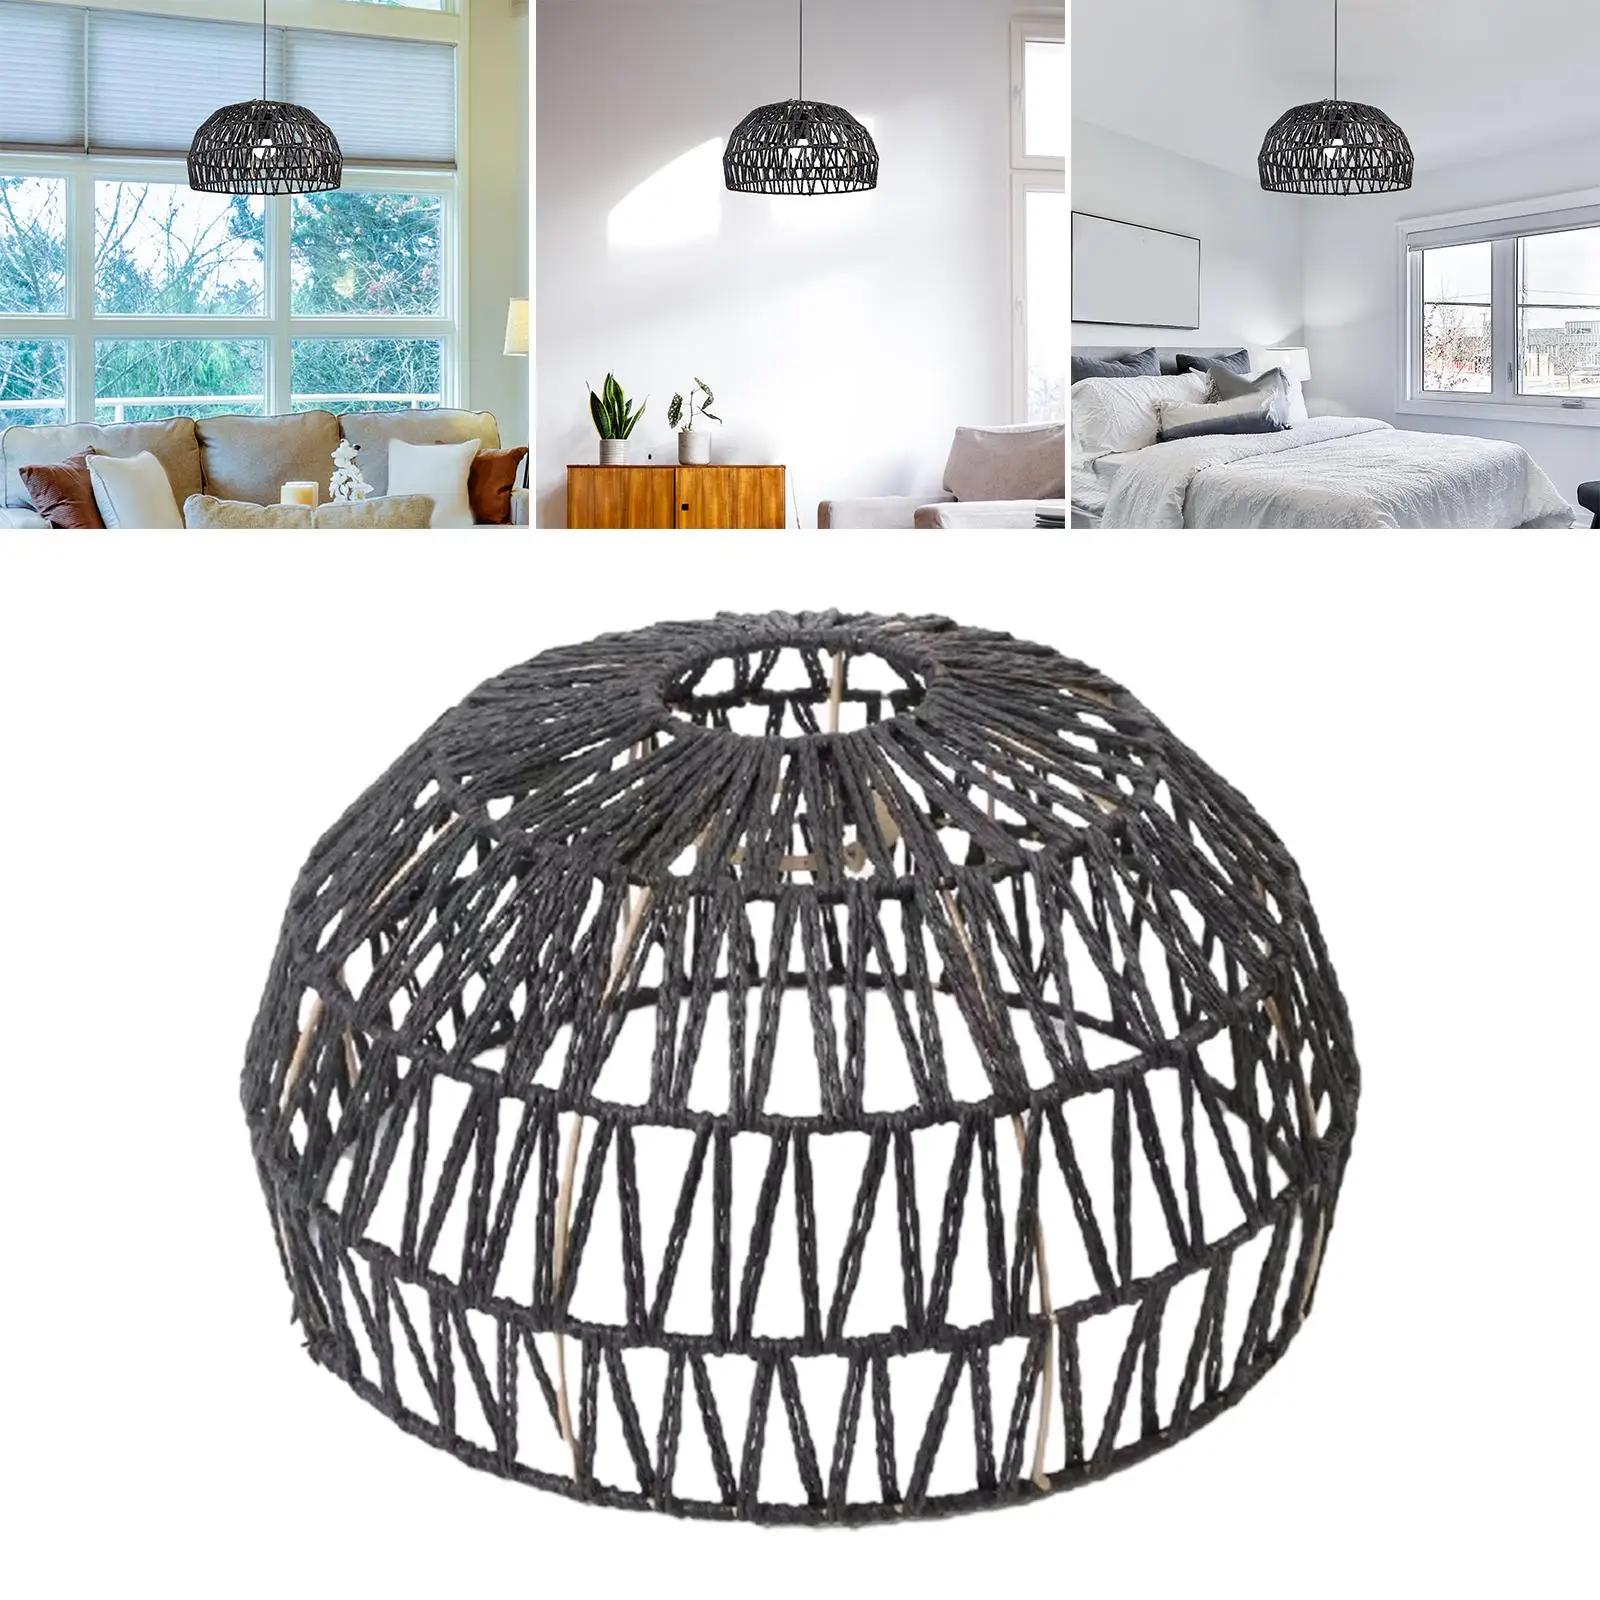 Boho Pendant Lamp Shade Decor Woven Paper Rope Ceiling Light Shade Fixture Chandelier Cover for Bedroom Cafe Kitchen Hotel